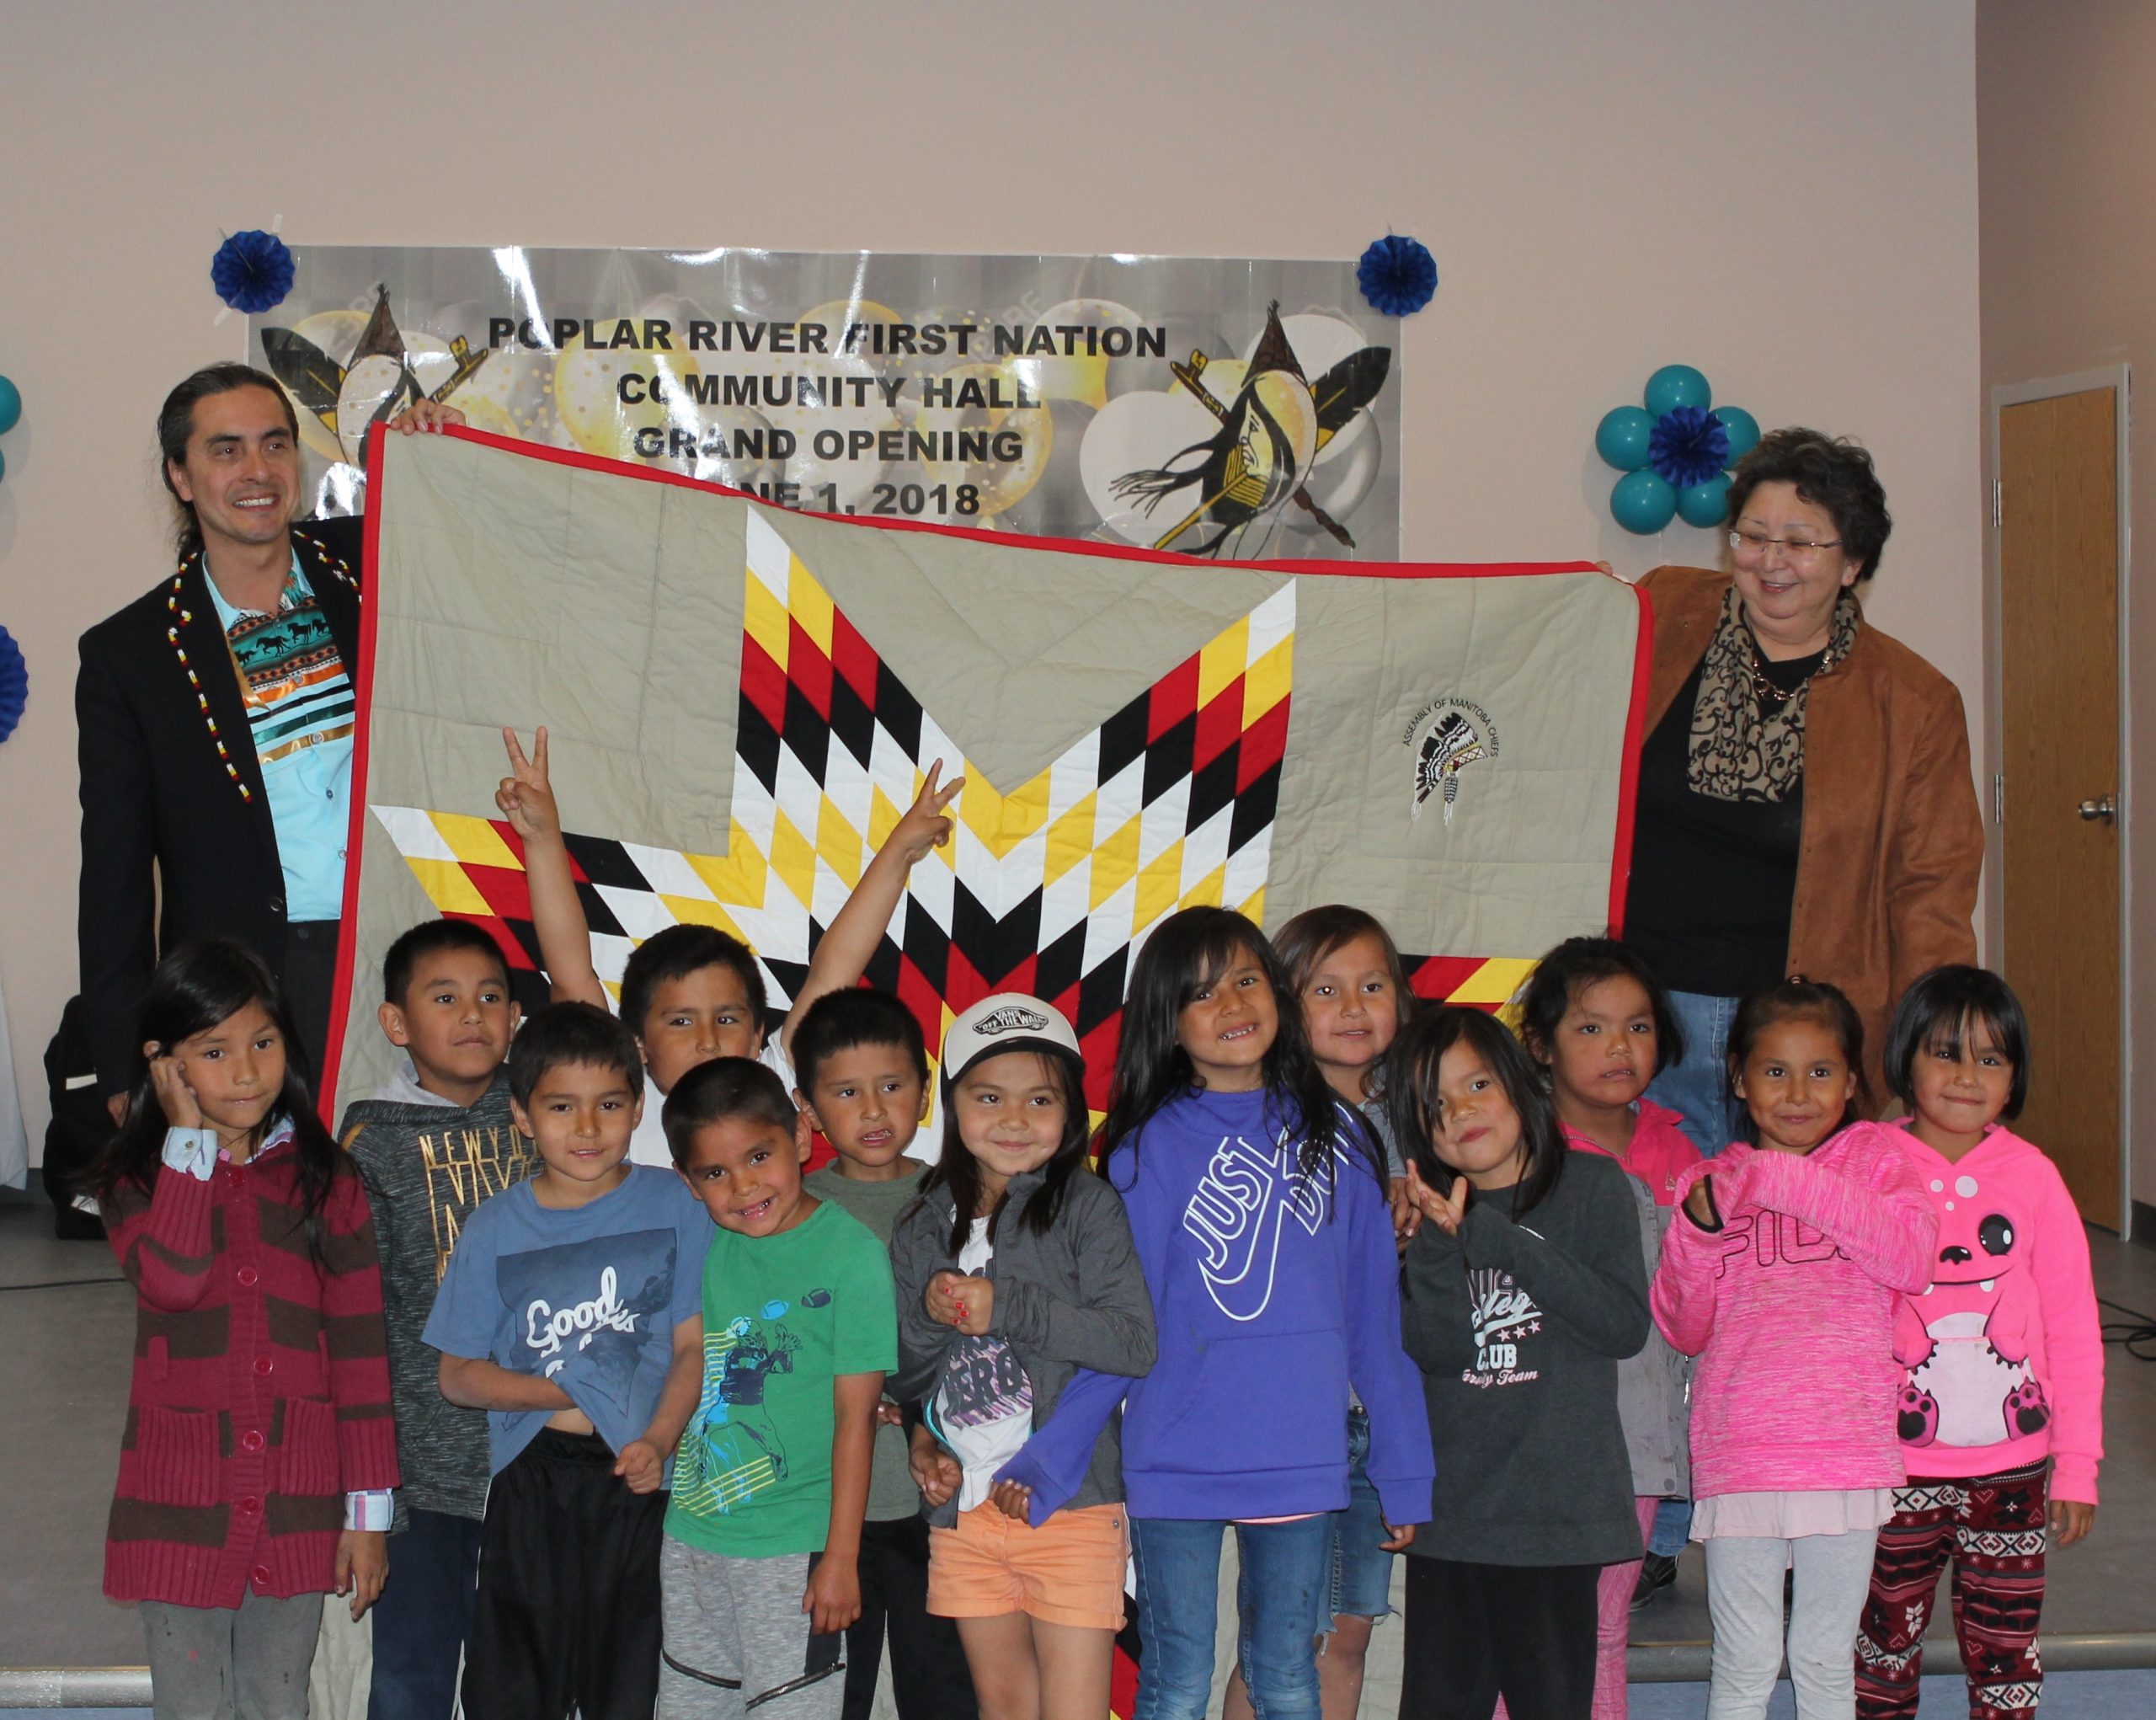 Grand Chief Dumas presents Chief Vera Mitchell and community members with a star blanket